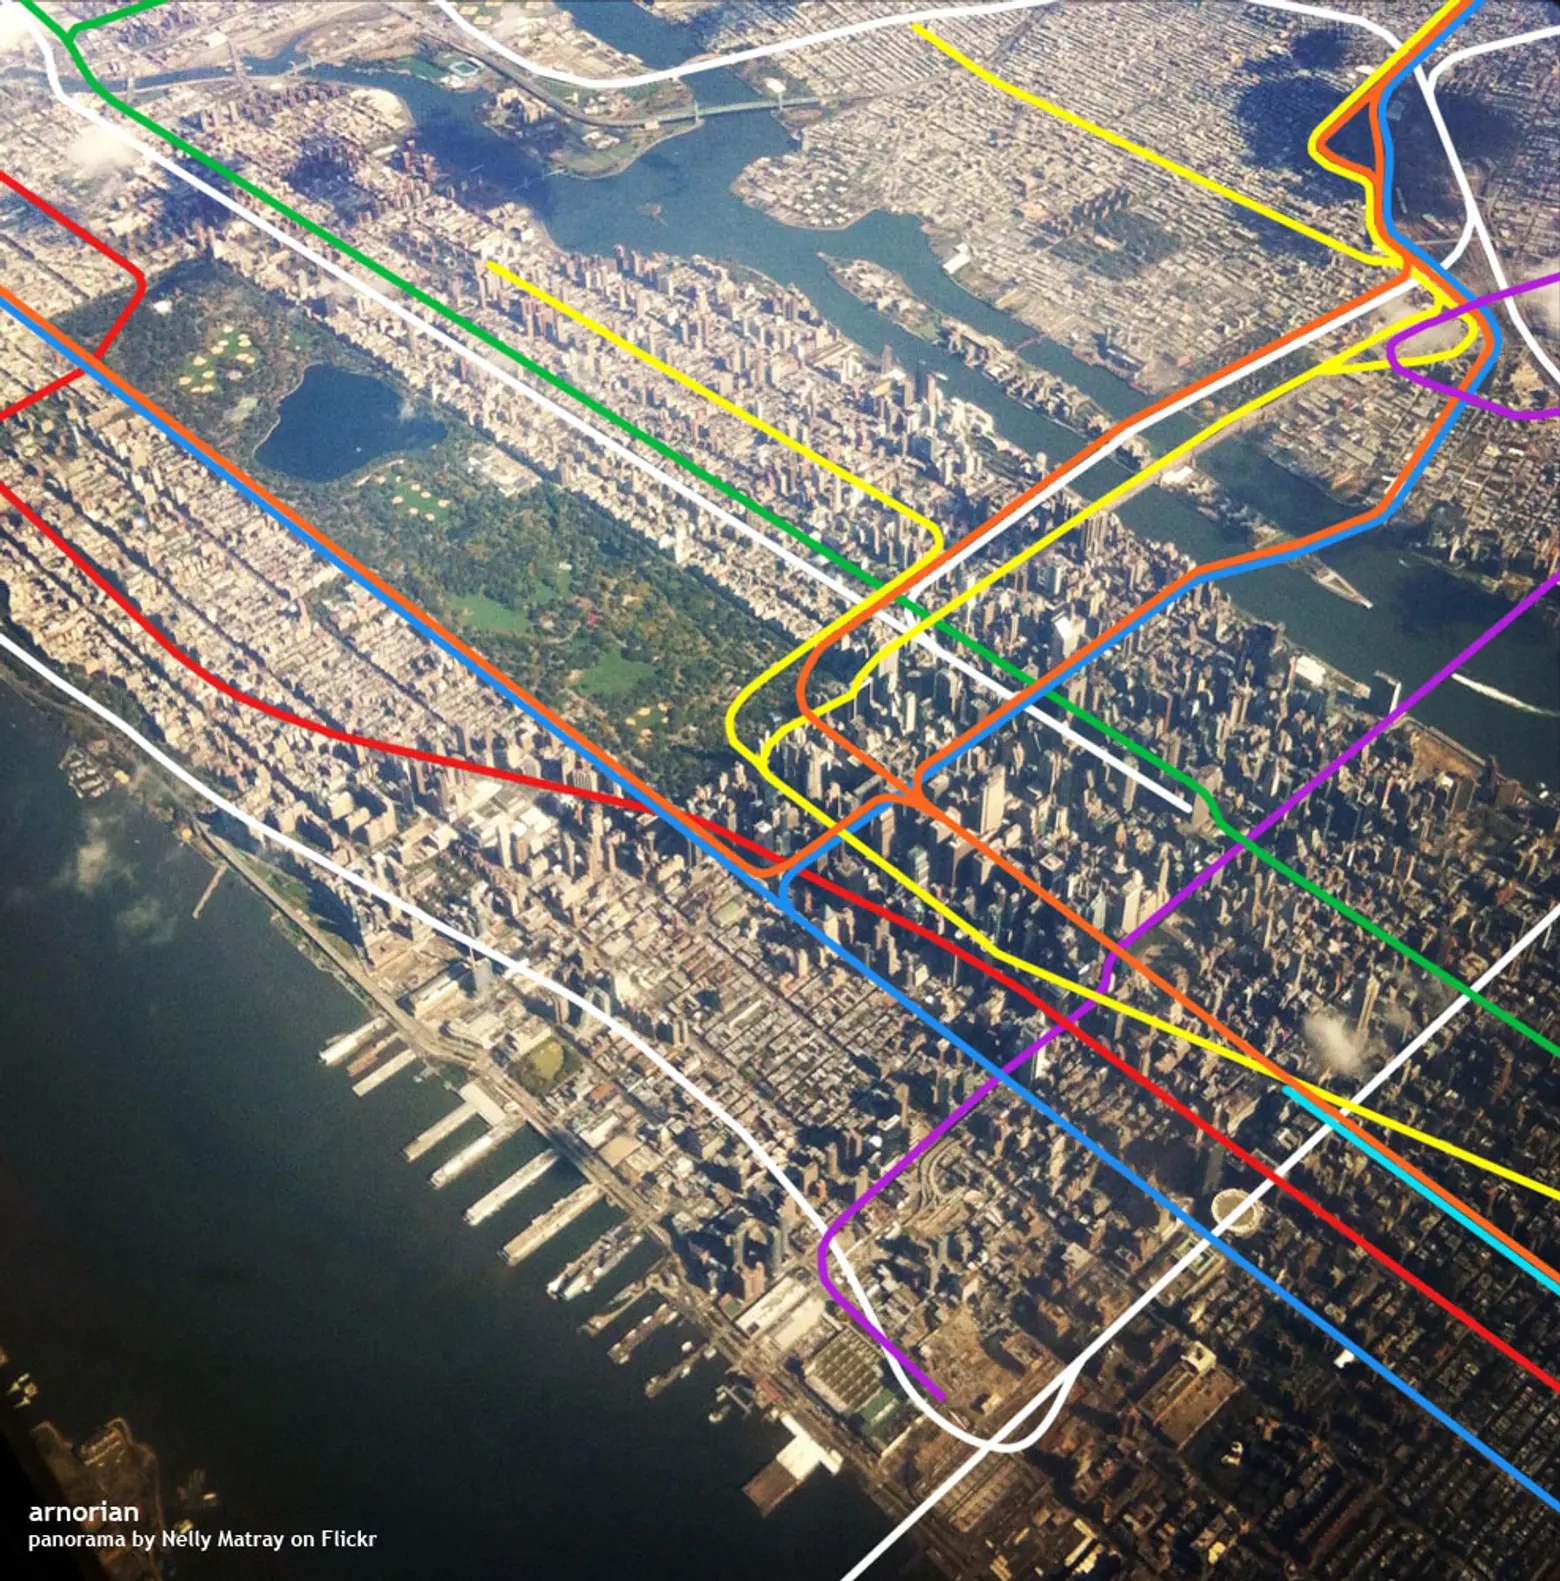 See NYC’s Subway Lines Superimposed Over an Aerial Photo of the City